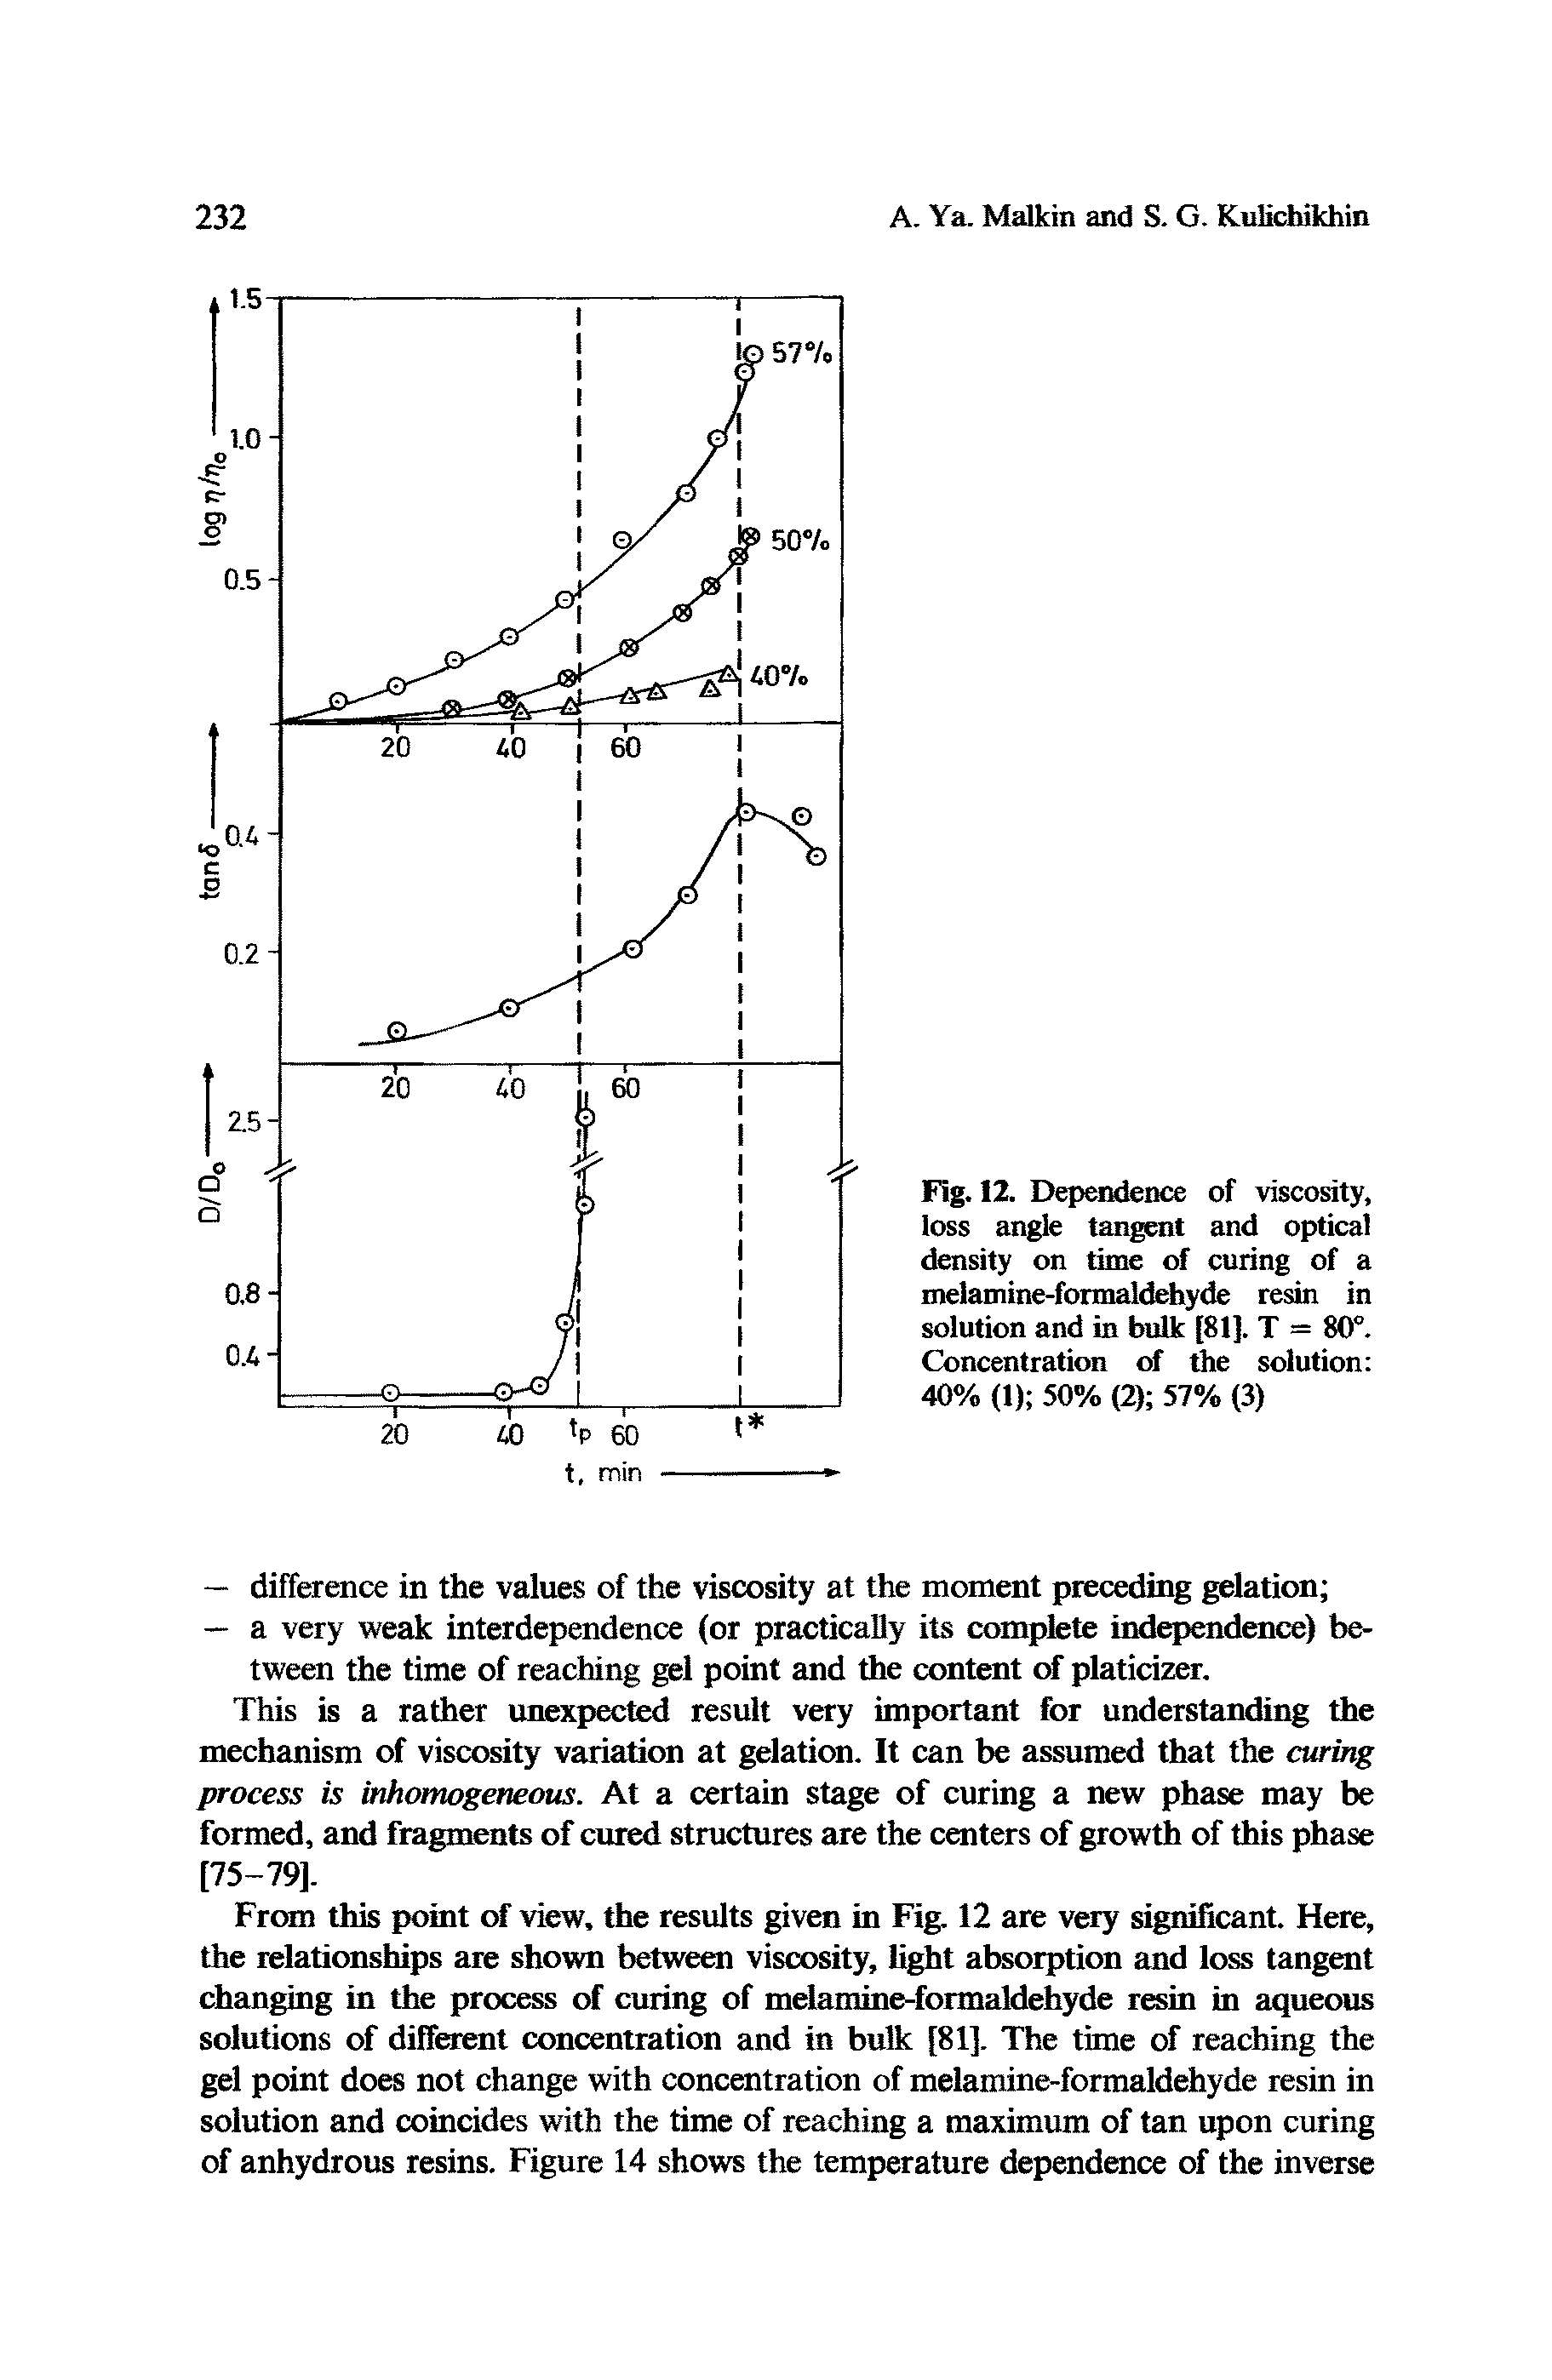 Fig. 12. Depemlence of viscosity, loss angle tangent and optical density on time of curing of a melamine-formaldehyde resin in solution and in bulk [81]. T = 80°. Concentration of fte solution 40% (1) 50% (2) 57% (3)...